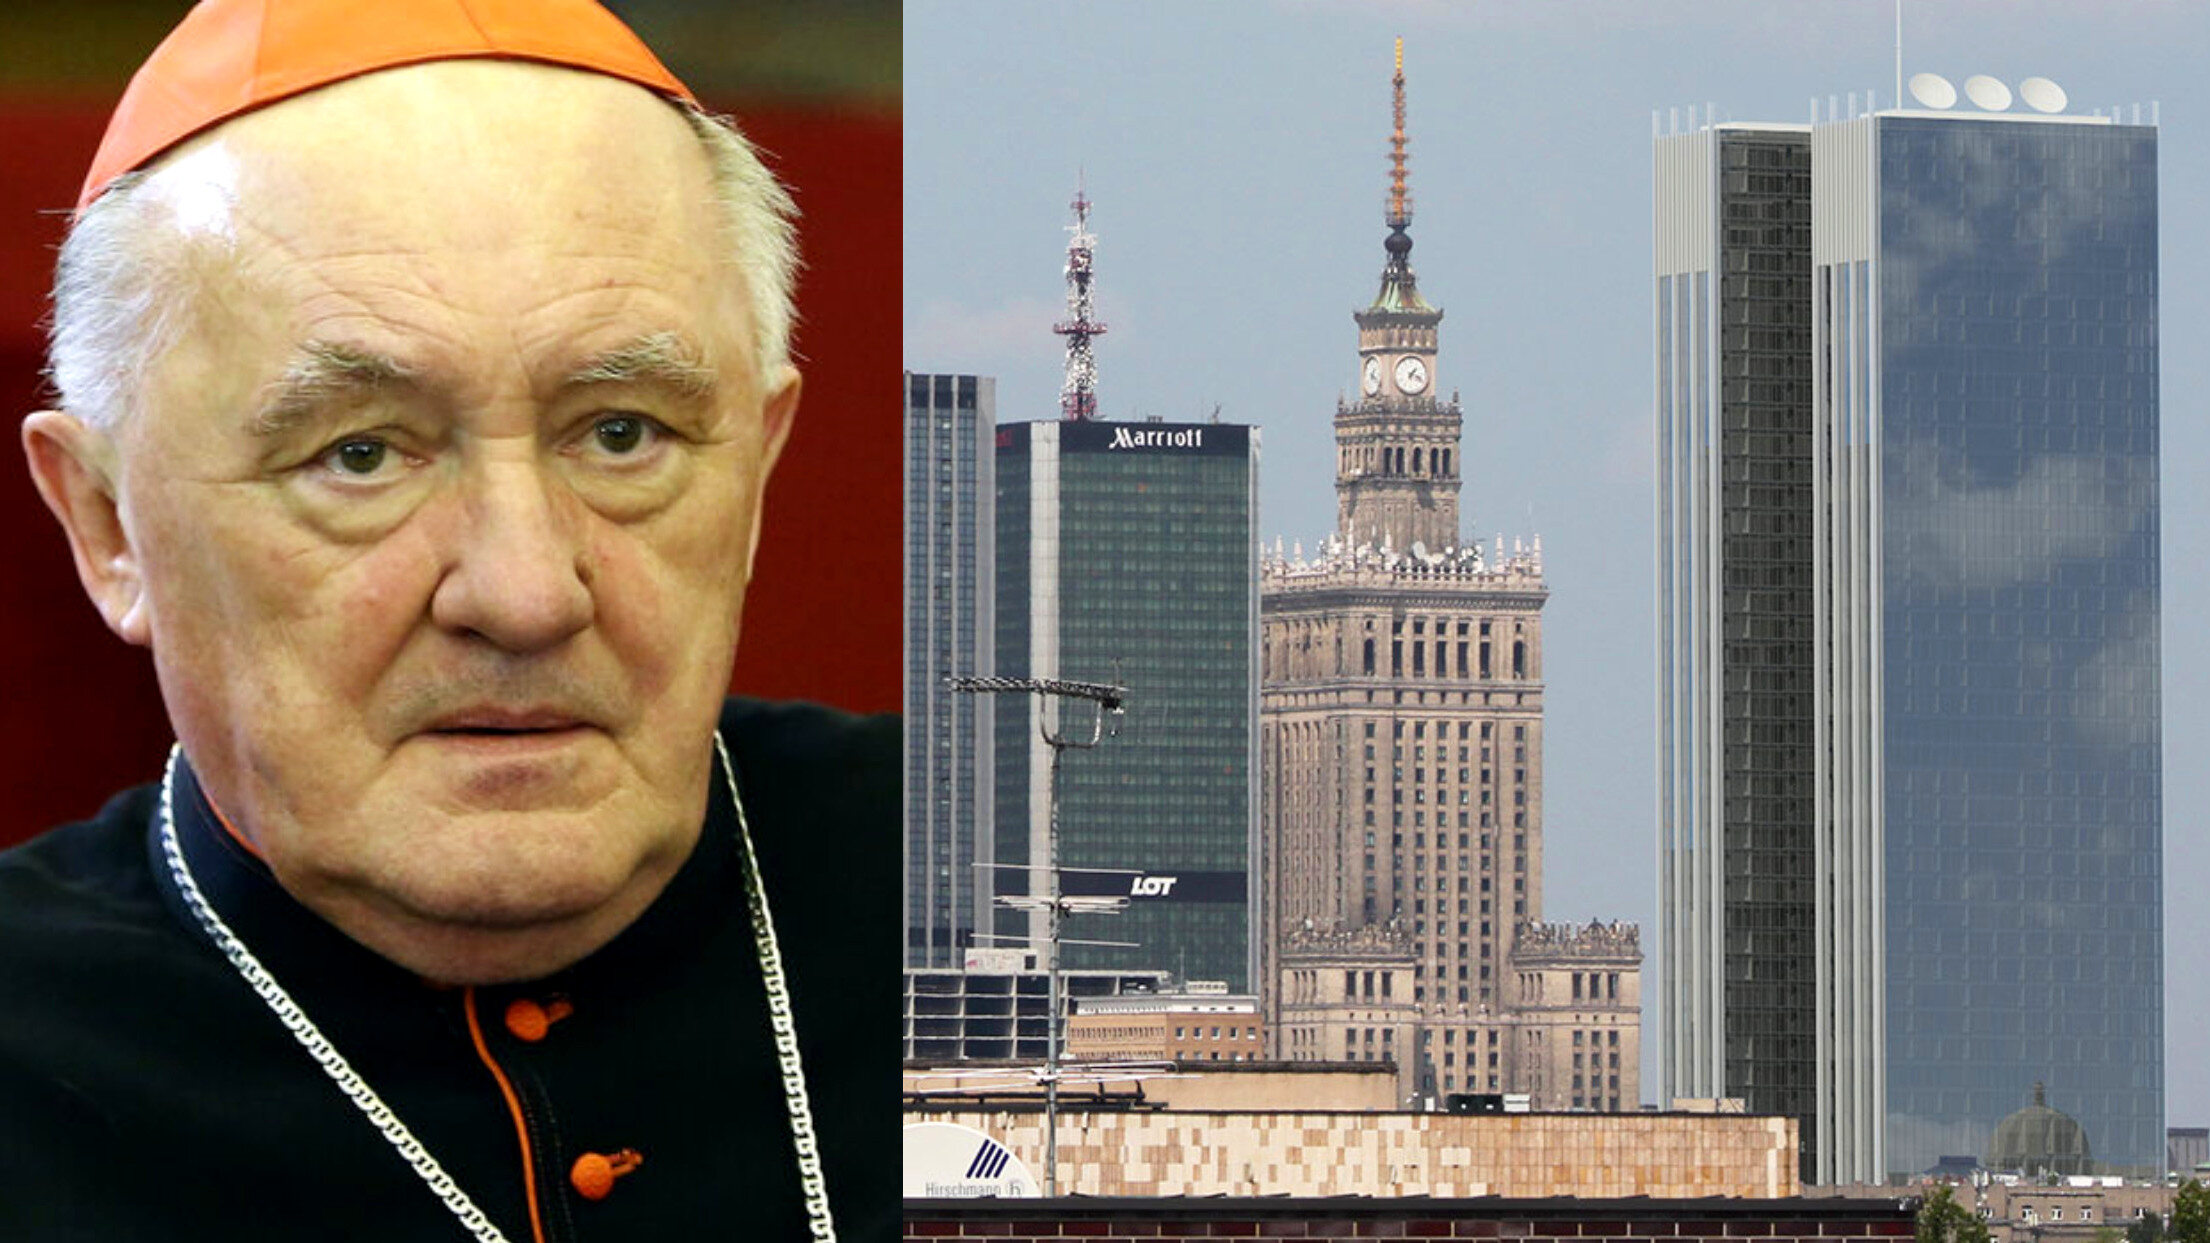 Curia is building a huge skyscraper in the center of Warsaw.  "We have received permission from the Pope"